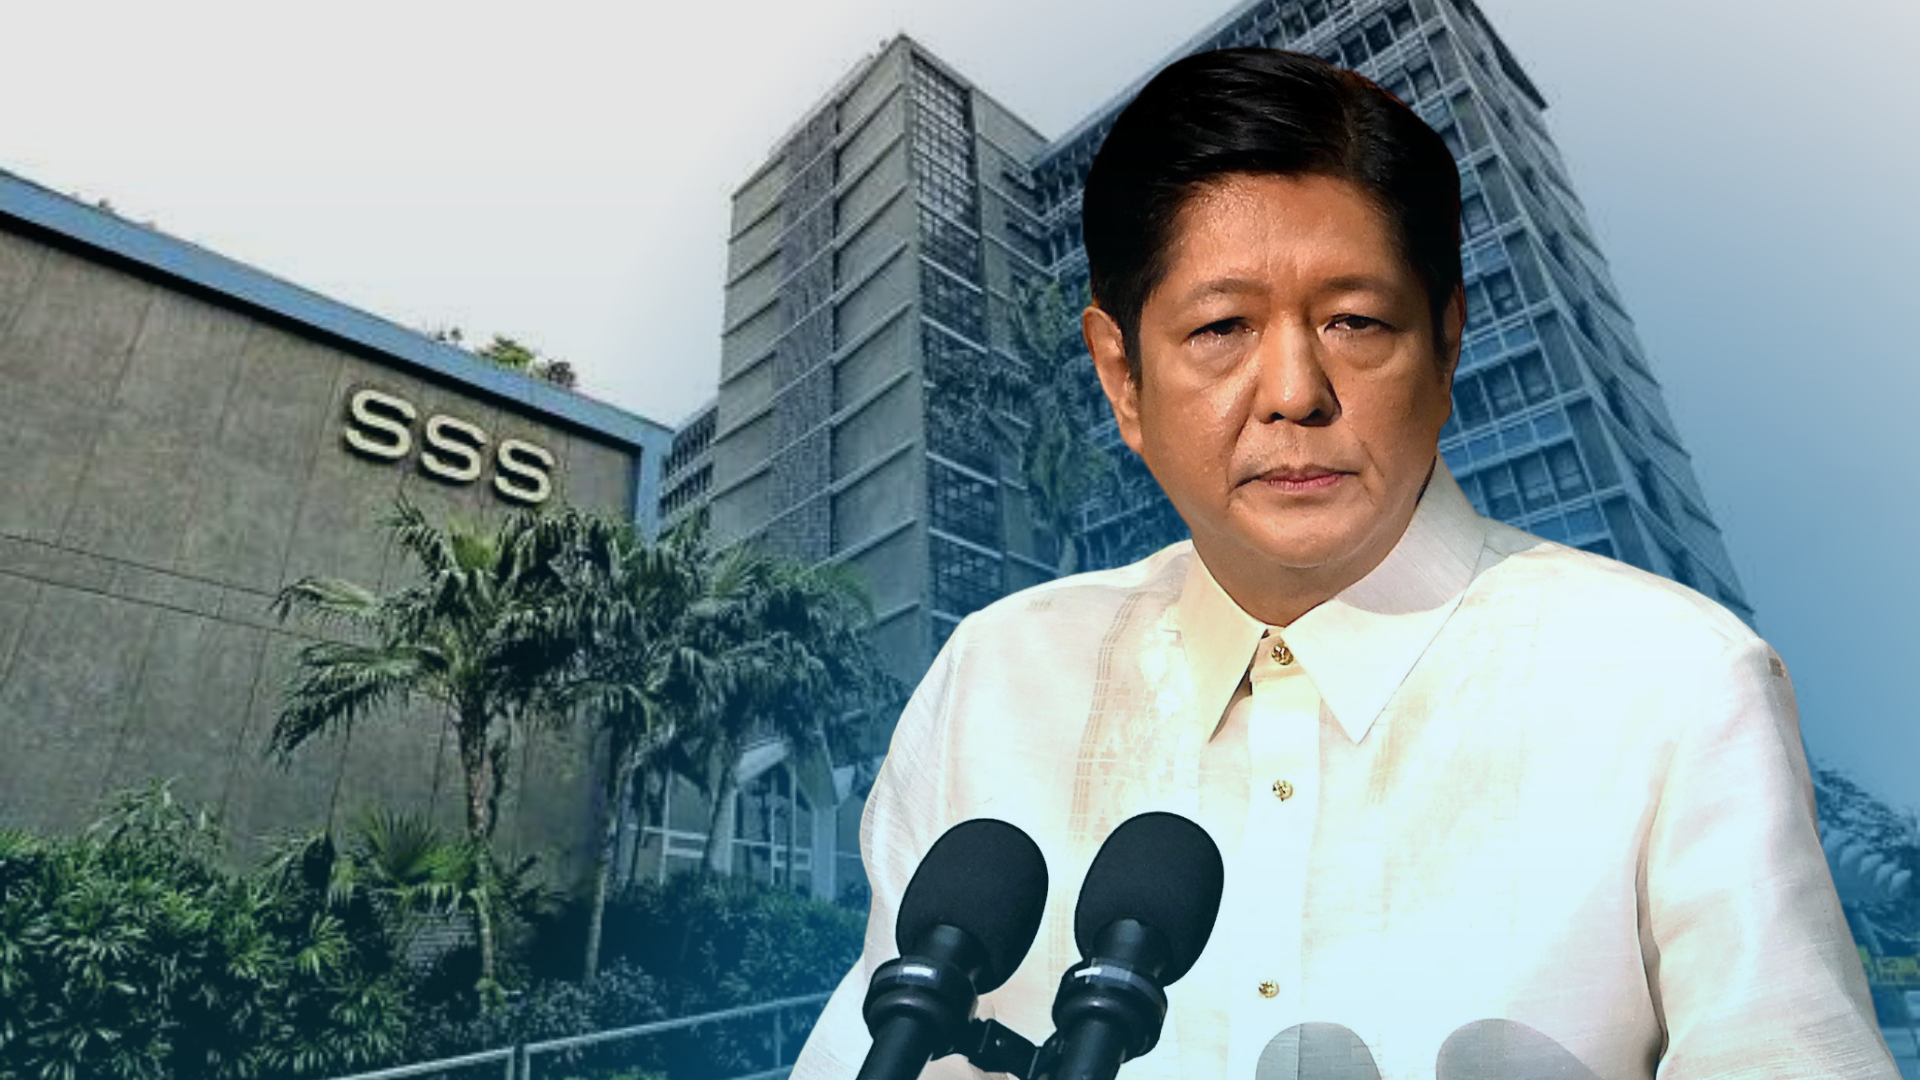 Bongbong Marcos commits to improving SSS services